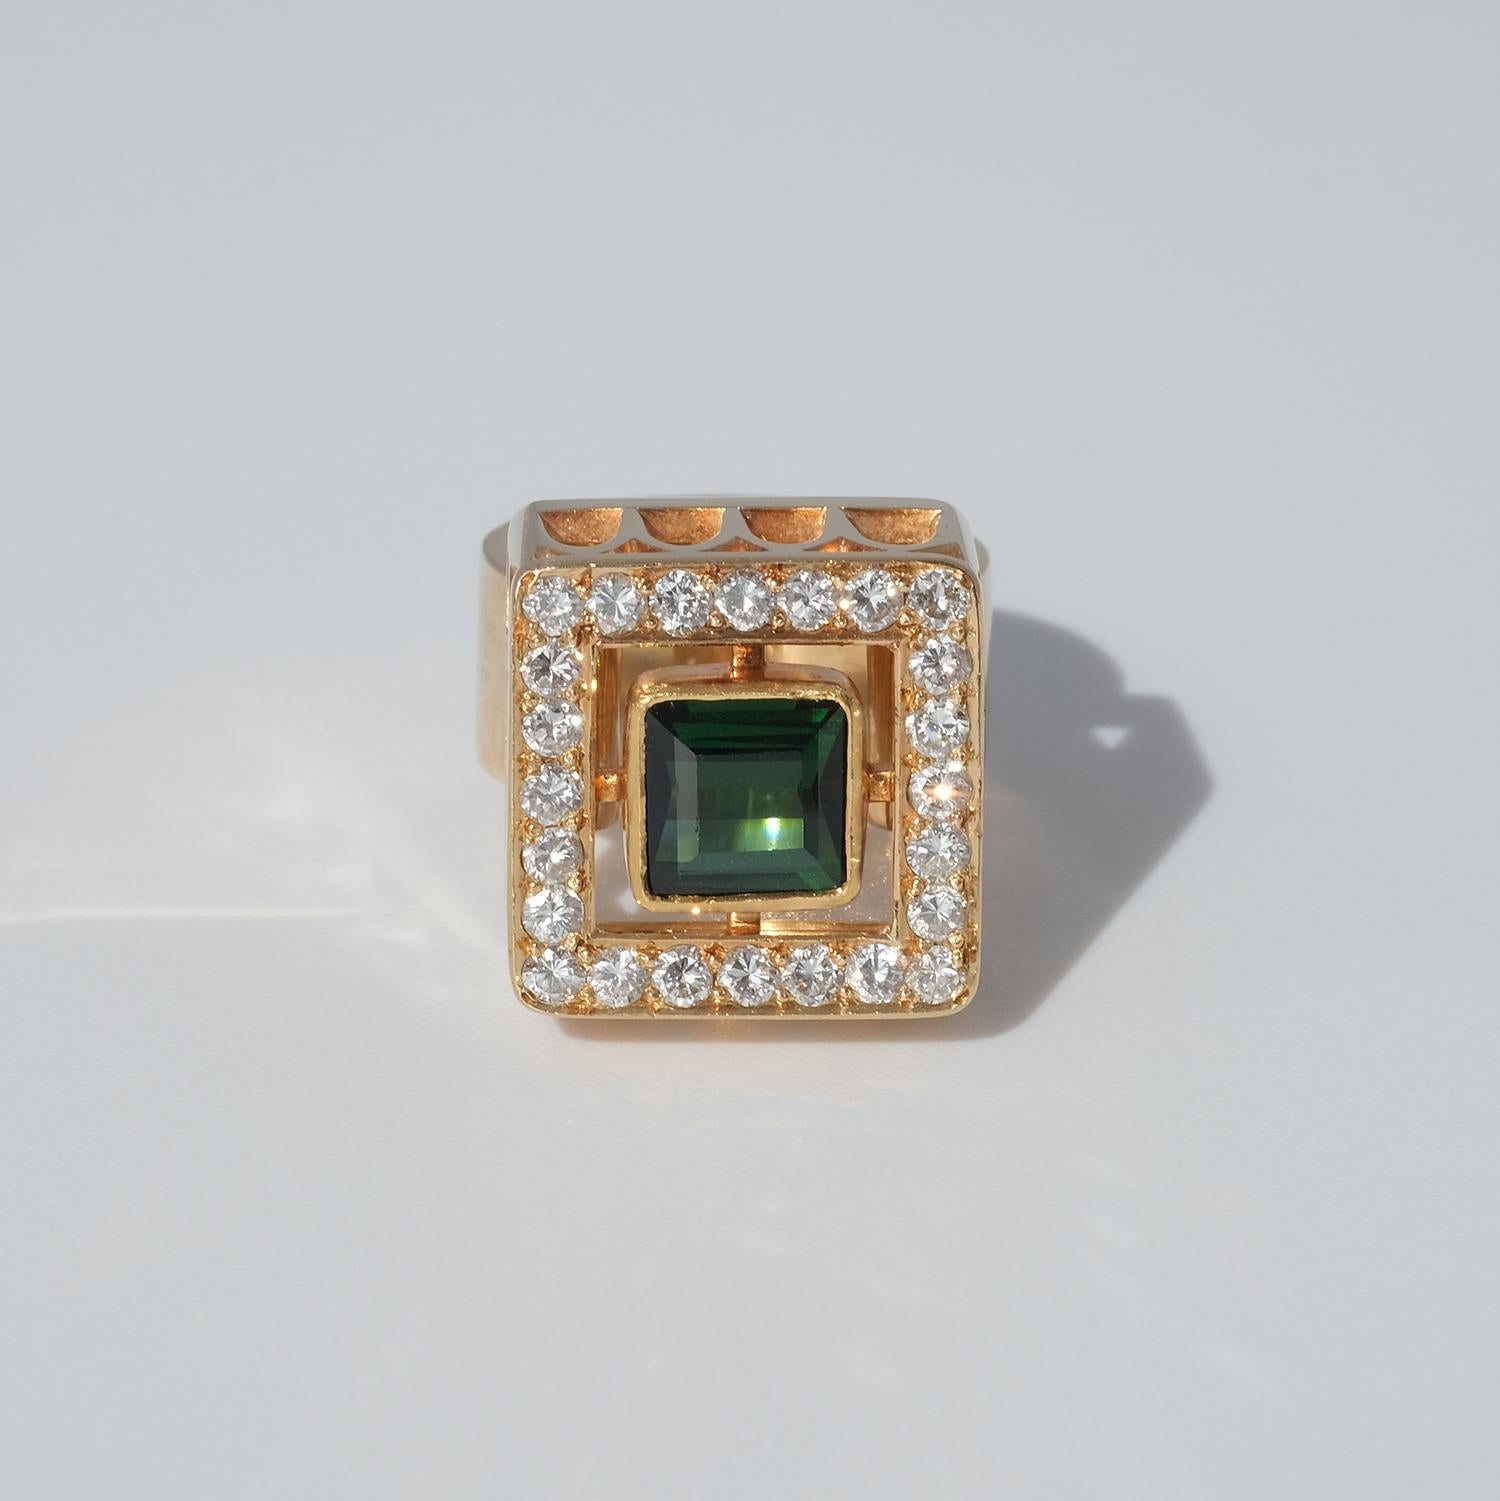 This 18 karat gold ring has a tourmaline and 24 brilliant cut diamonds. The ring's head is square shaped with a pattern that looks like the window-frames of an ancient English Gothic cathedral. 

The ring radiates powerfulness and self-confidence